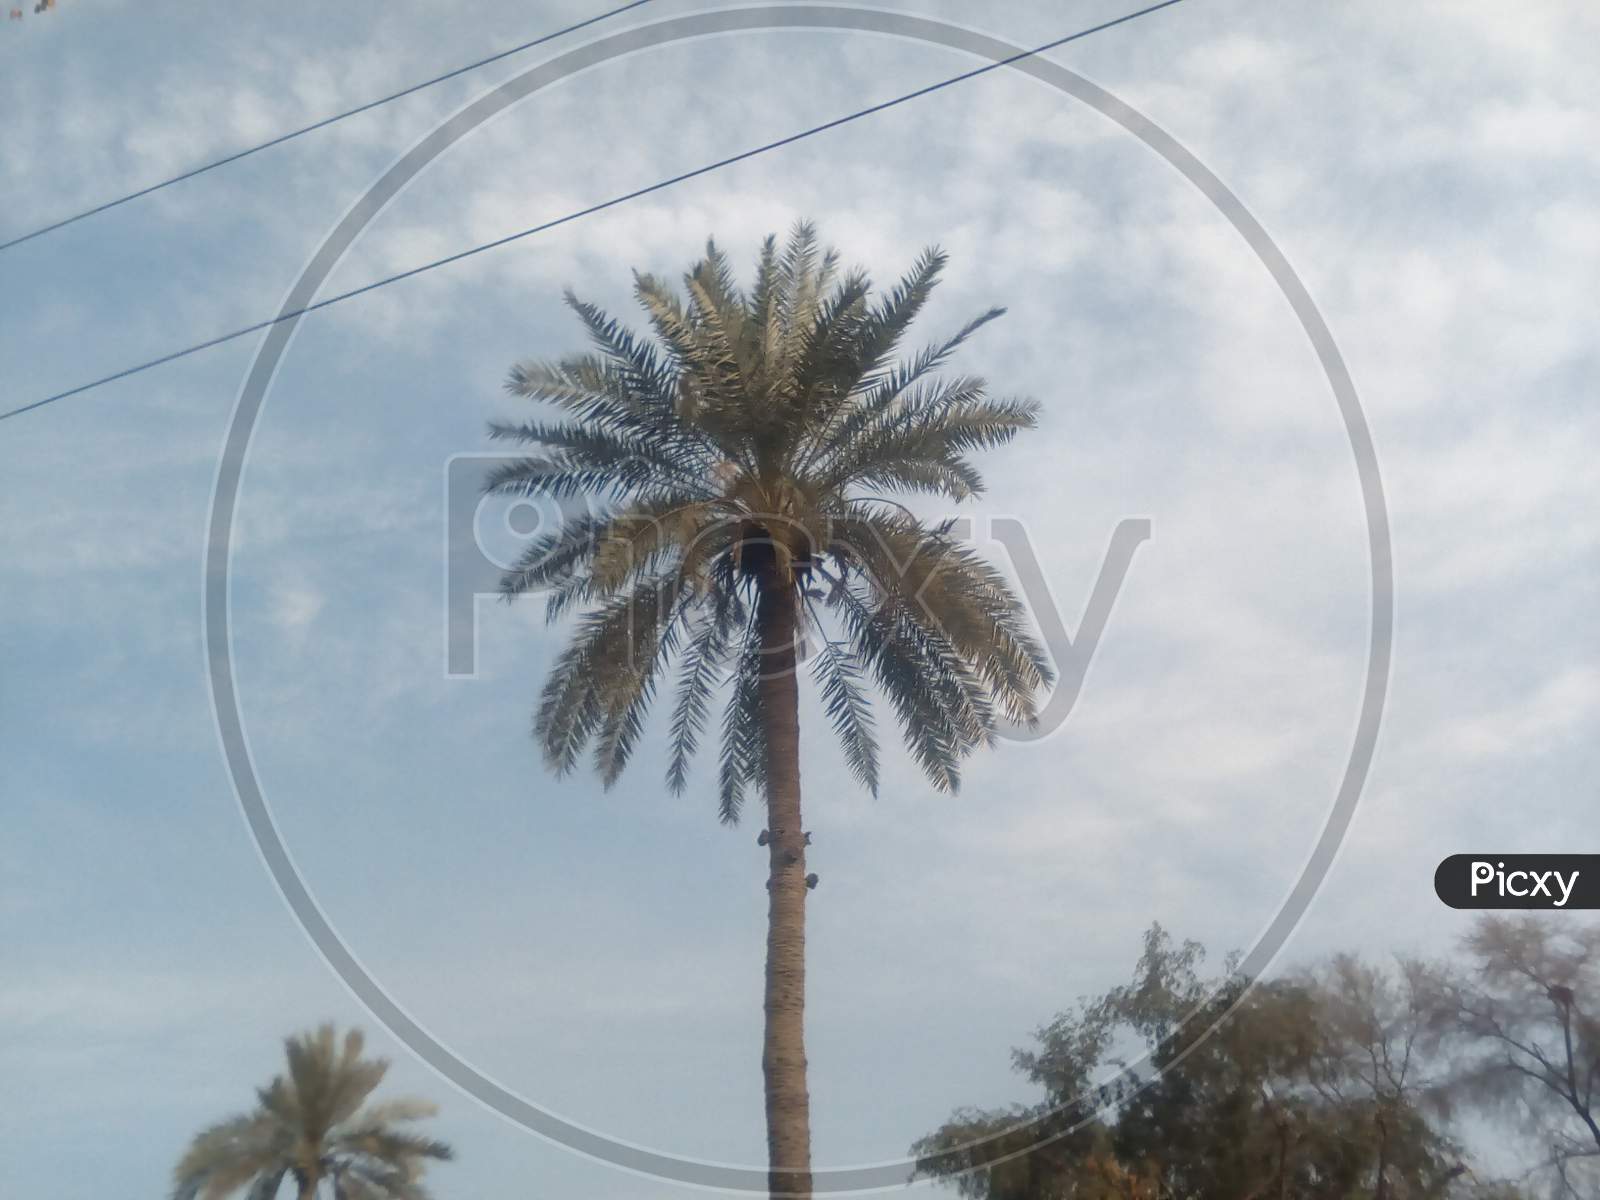 This is Palm Tree with white clouds on the sky